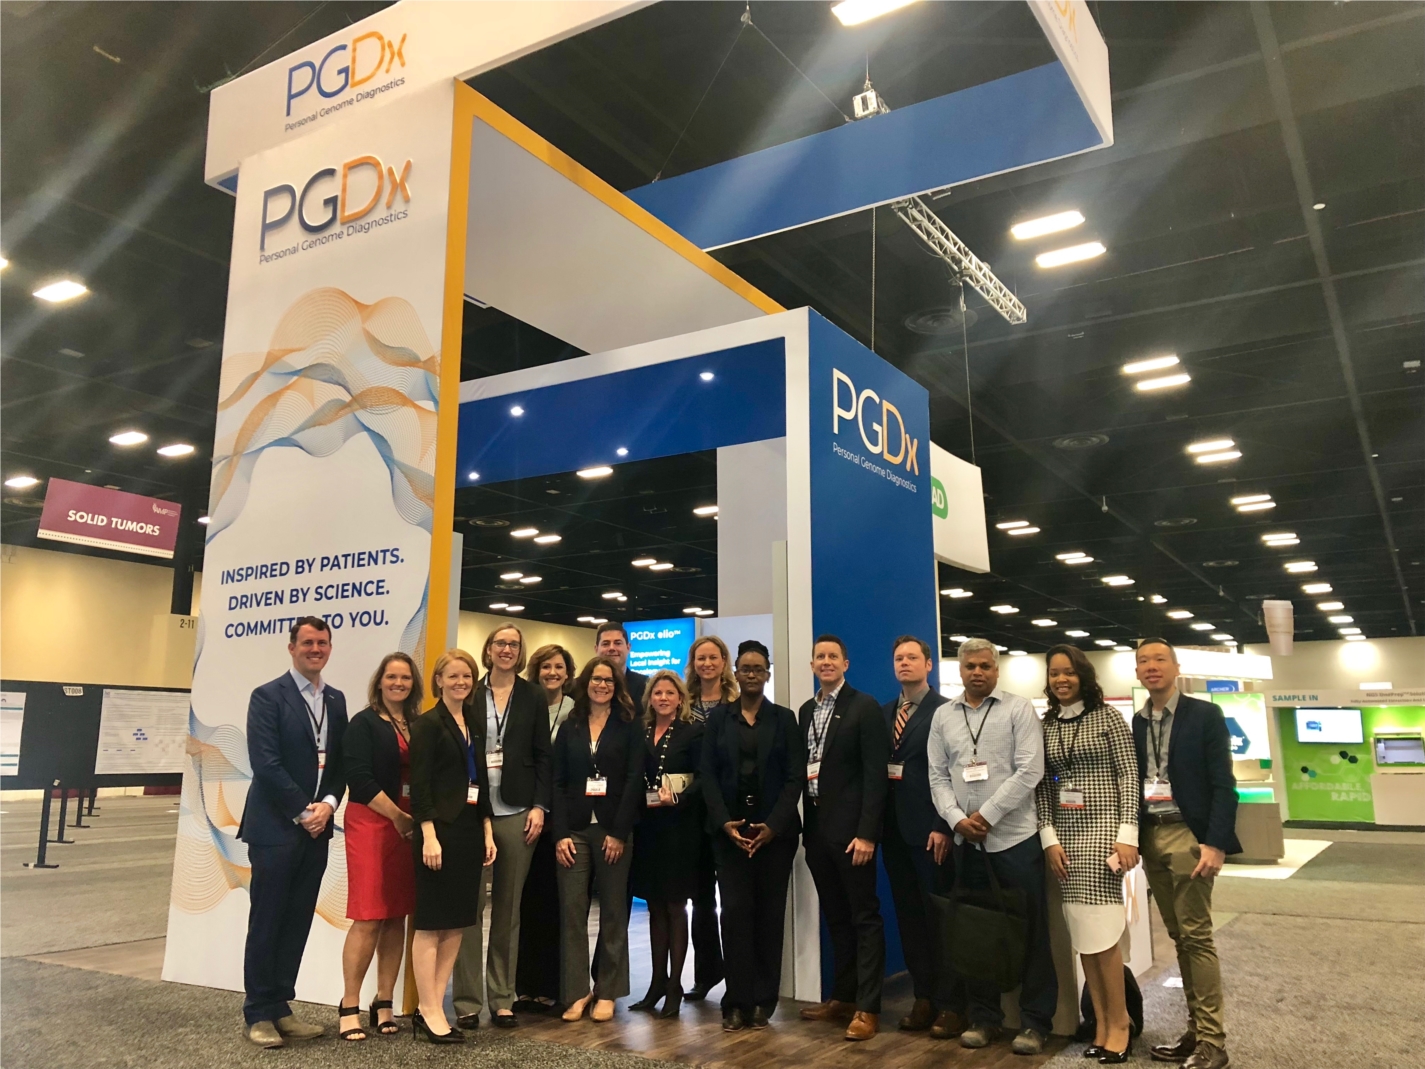 PGDx at the Annual AMP Meeting & Expo